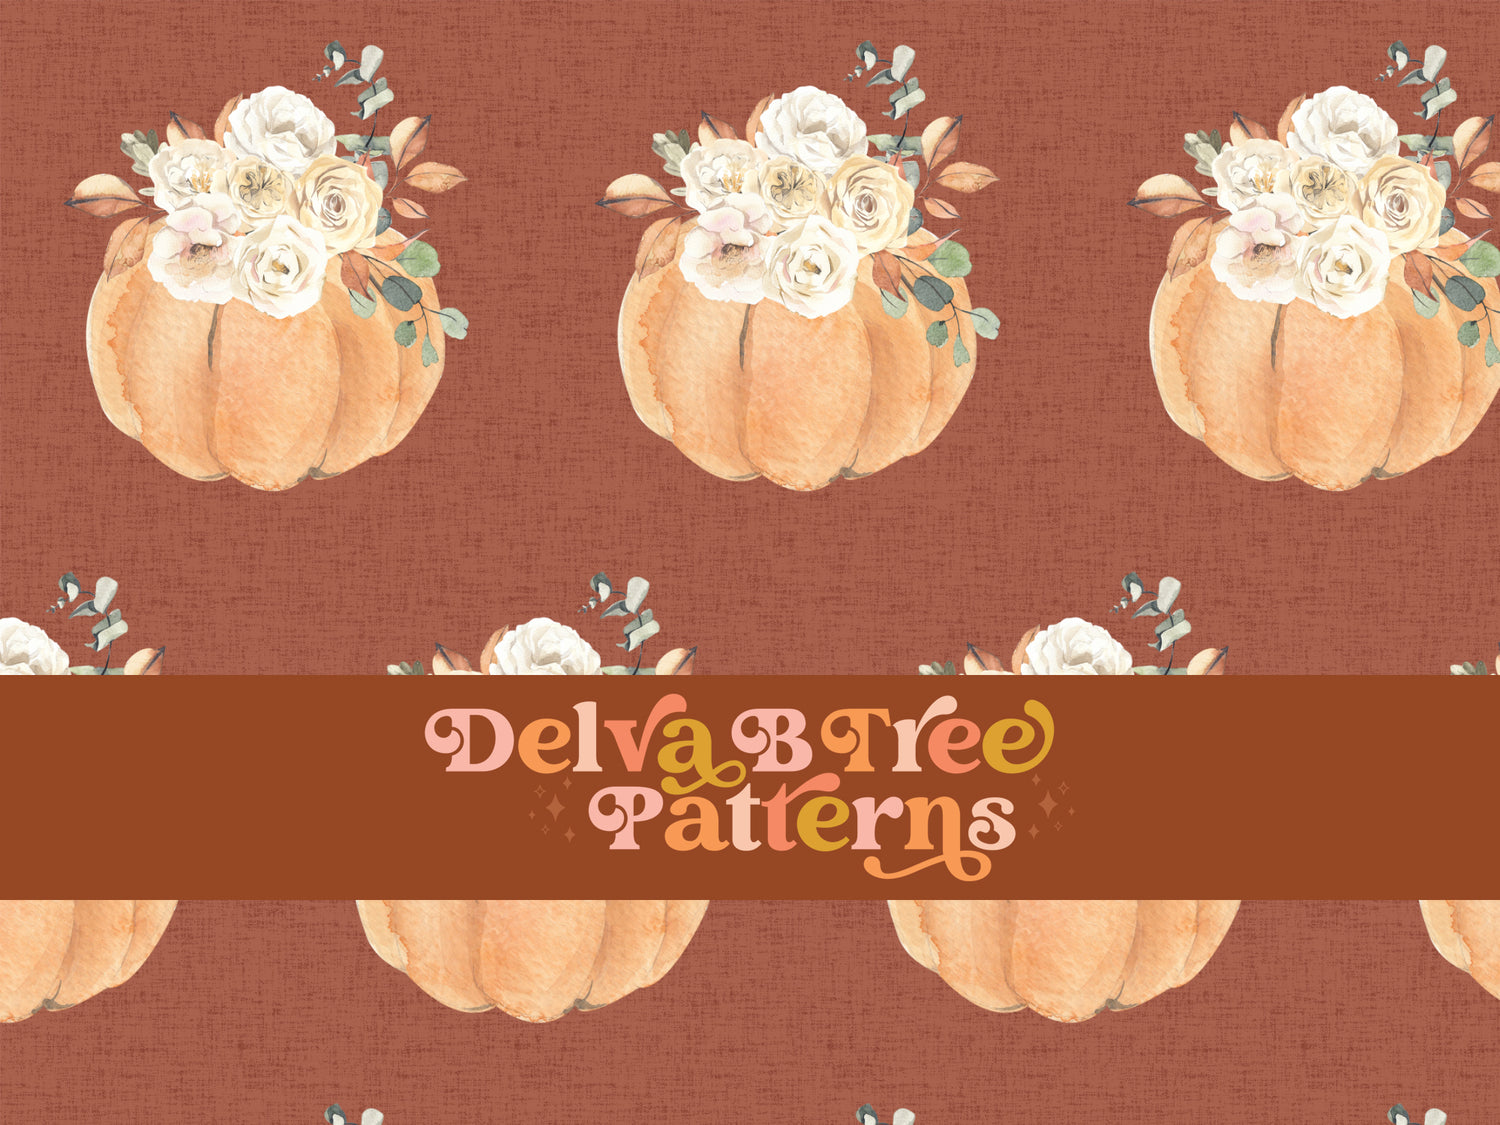 Watercolor orange pumpkins, flowers and leaves on a textured burnt cinnamon seamless file for fabric printing. Autumn Farmhouse Repeat Pattern for textiles, polymailers, baby boy lovey blankets, nursery crib bedding, kids clothing, girls hair accessories, home decor accents, pet products.